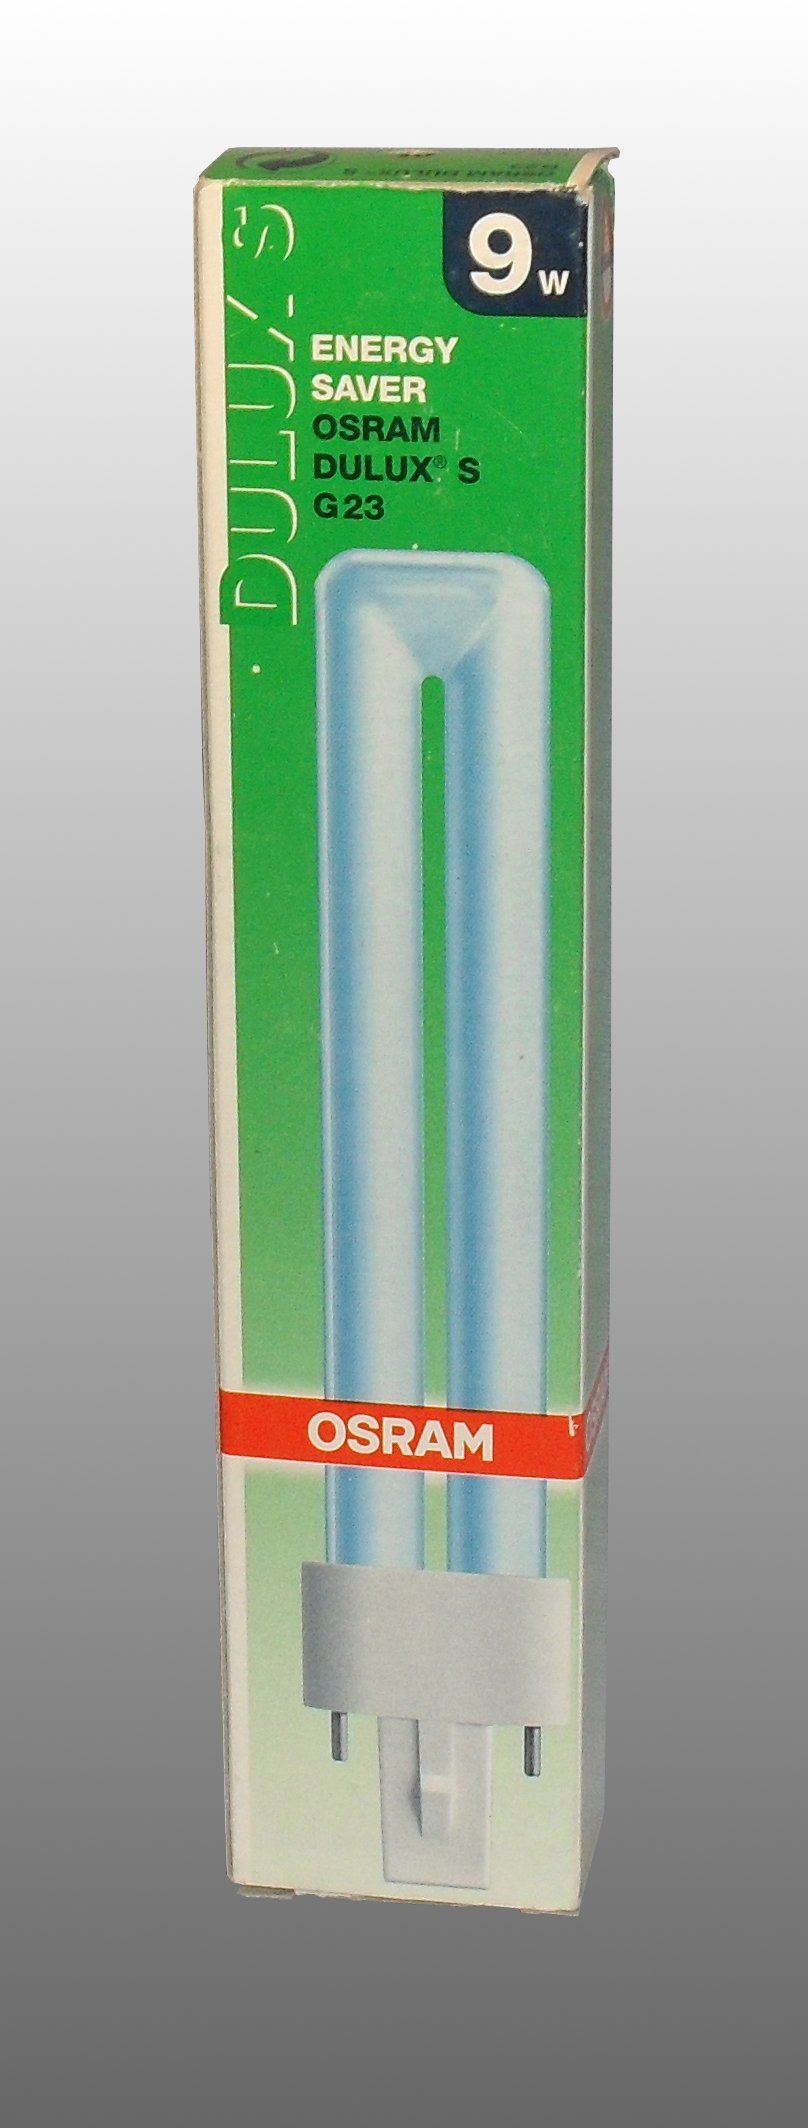 Osram Dulux S G23 9W/67 Blue Compact Fluorescent Lamp - Overview of lamp packaging